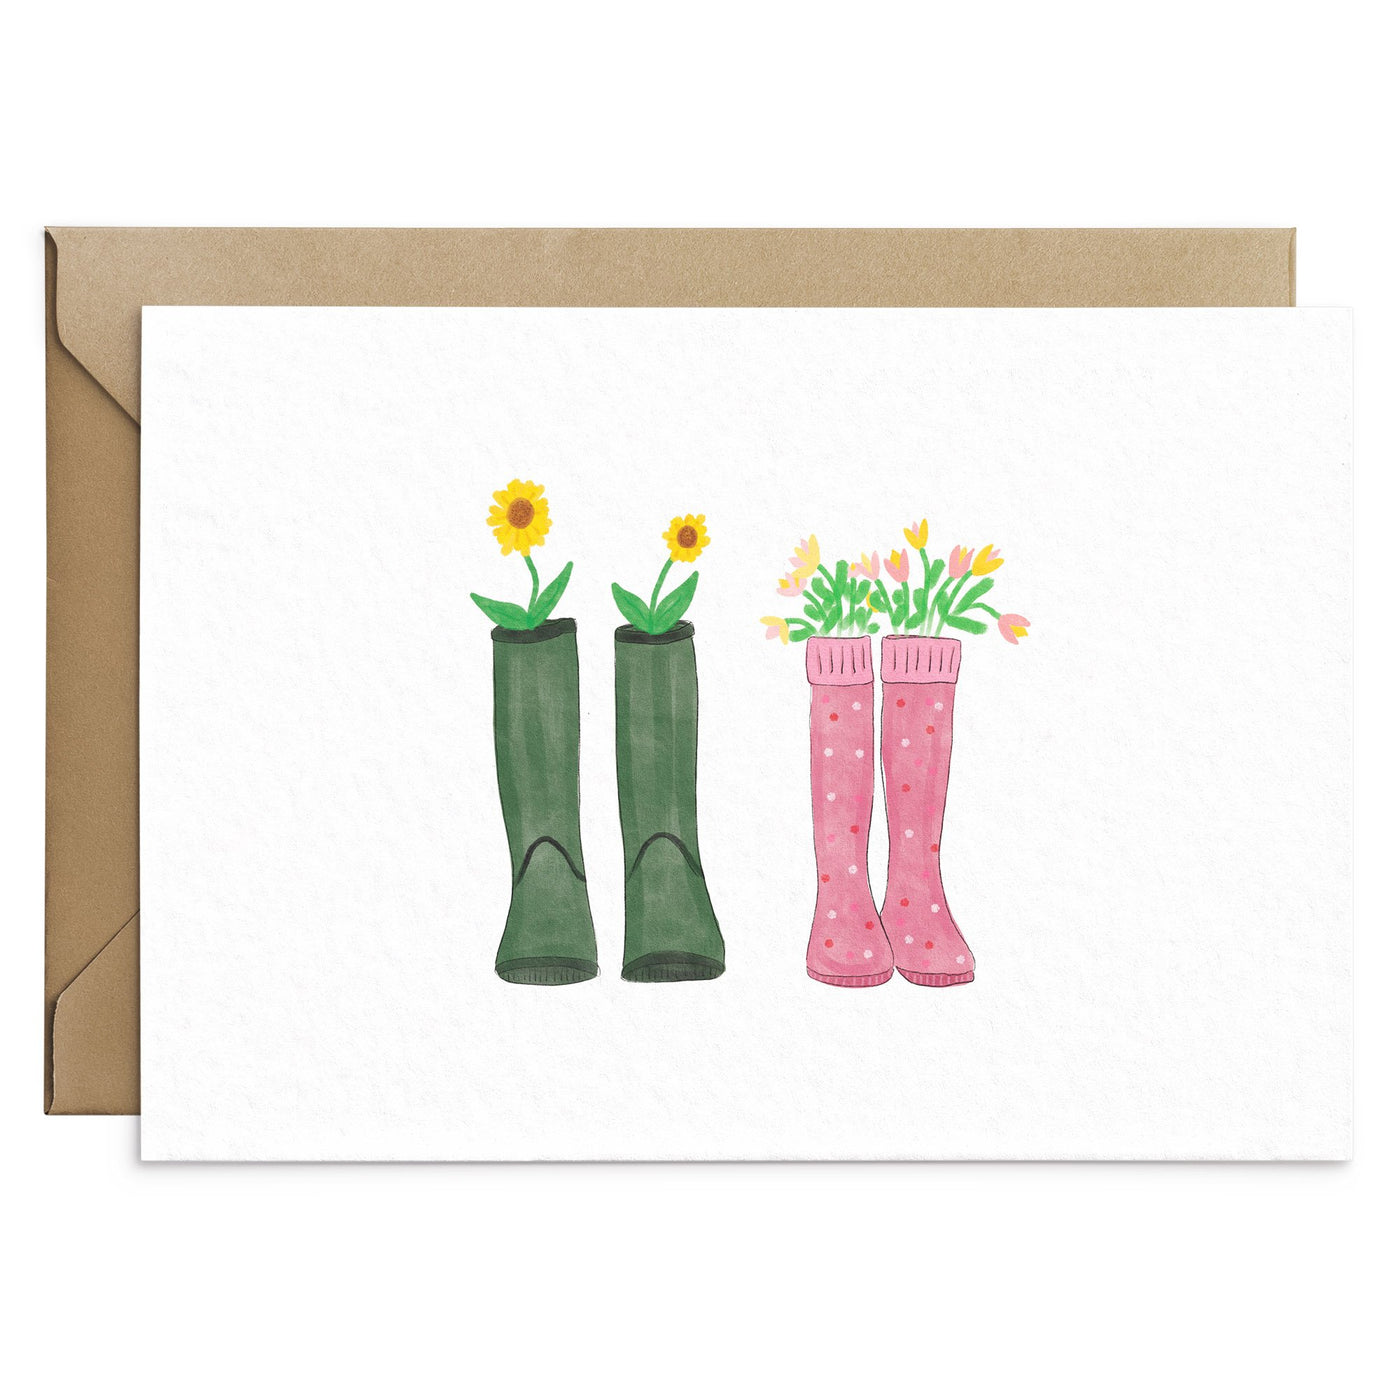 His and Hers Wellies Blank Card - Poppins & Co.